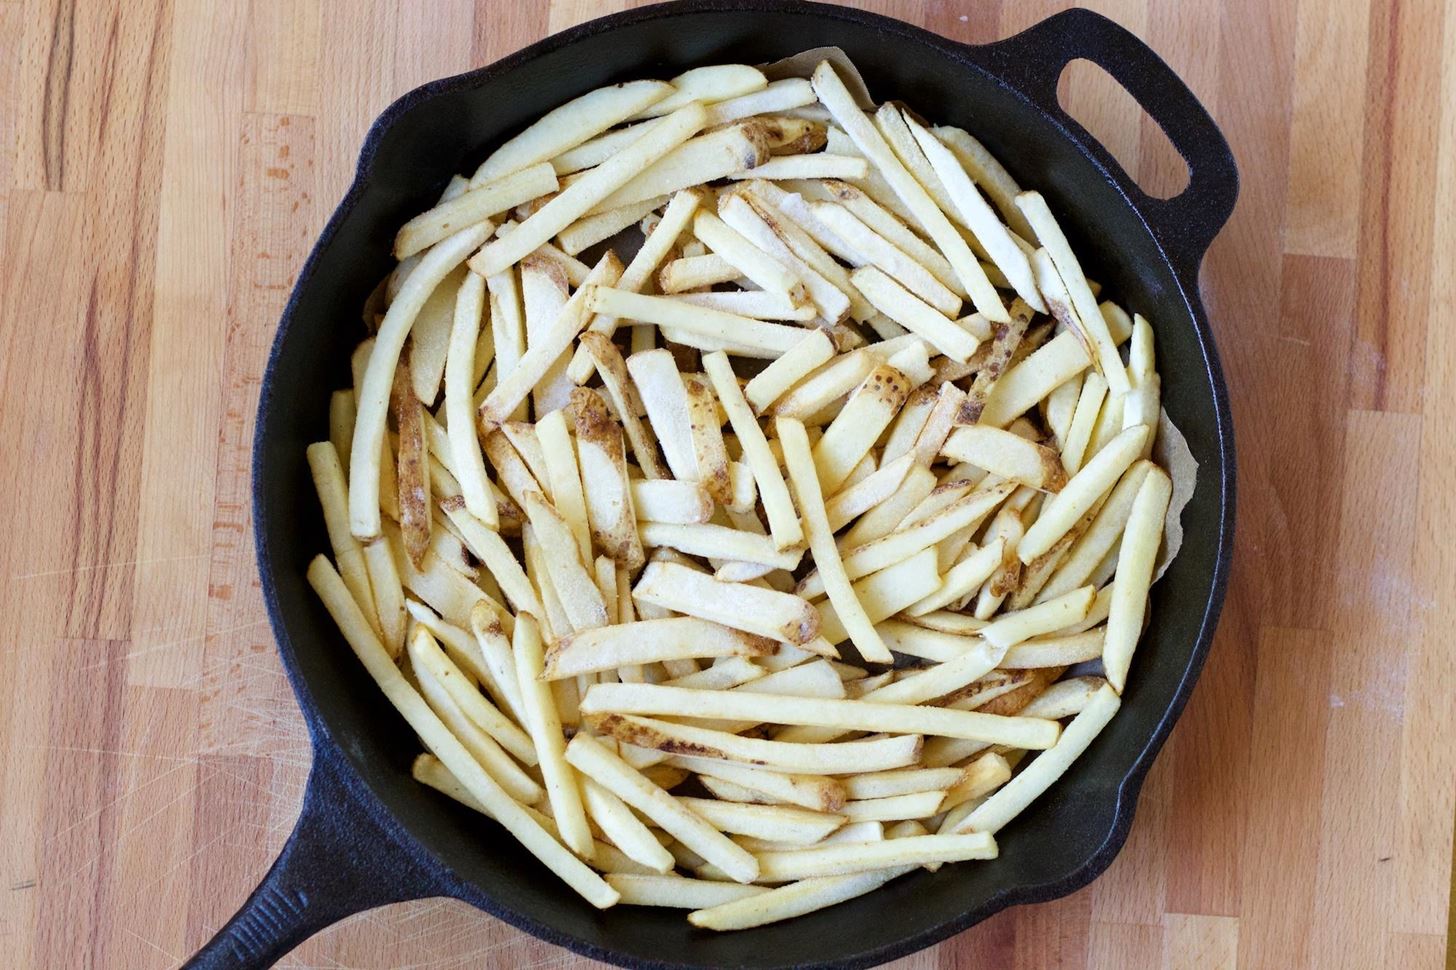 French Fry Pizza Crust—Your Drunk Self Will Thank You Later